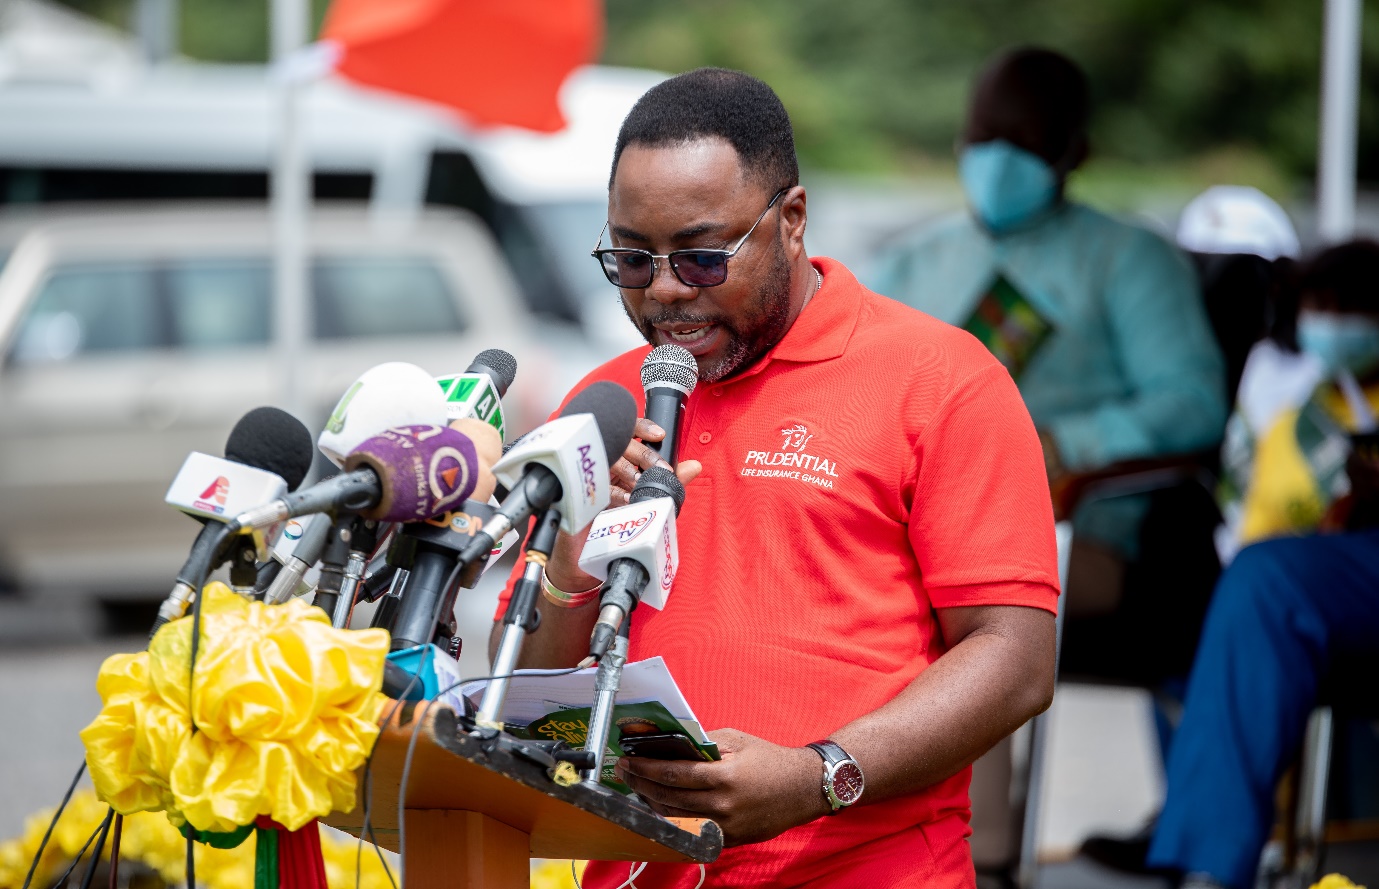 Prudential Life, Prudence Foundation and Didier Drogba Foundation launch Safe Steps Road Safety campaign